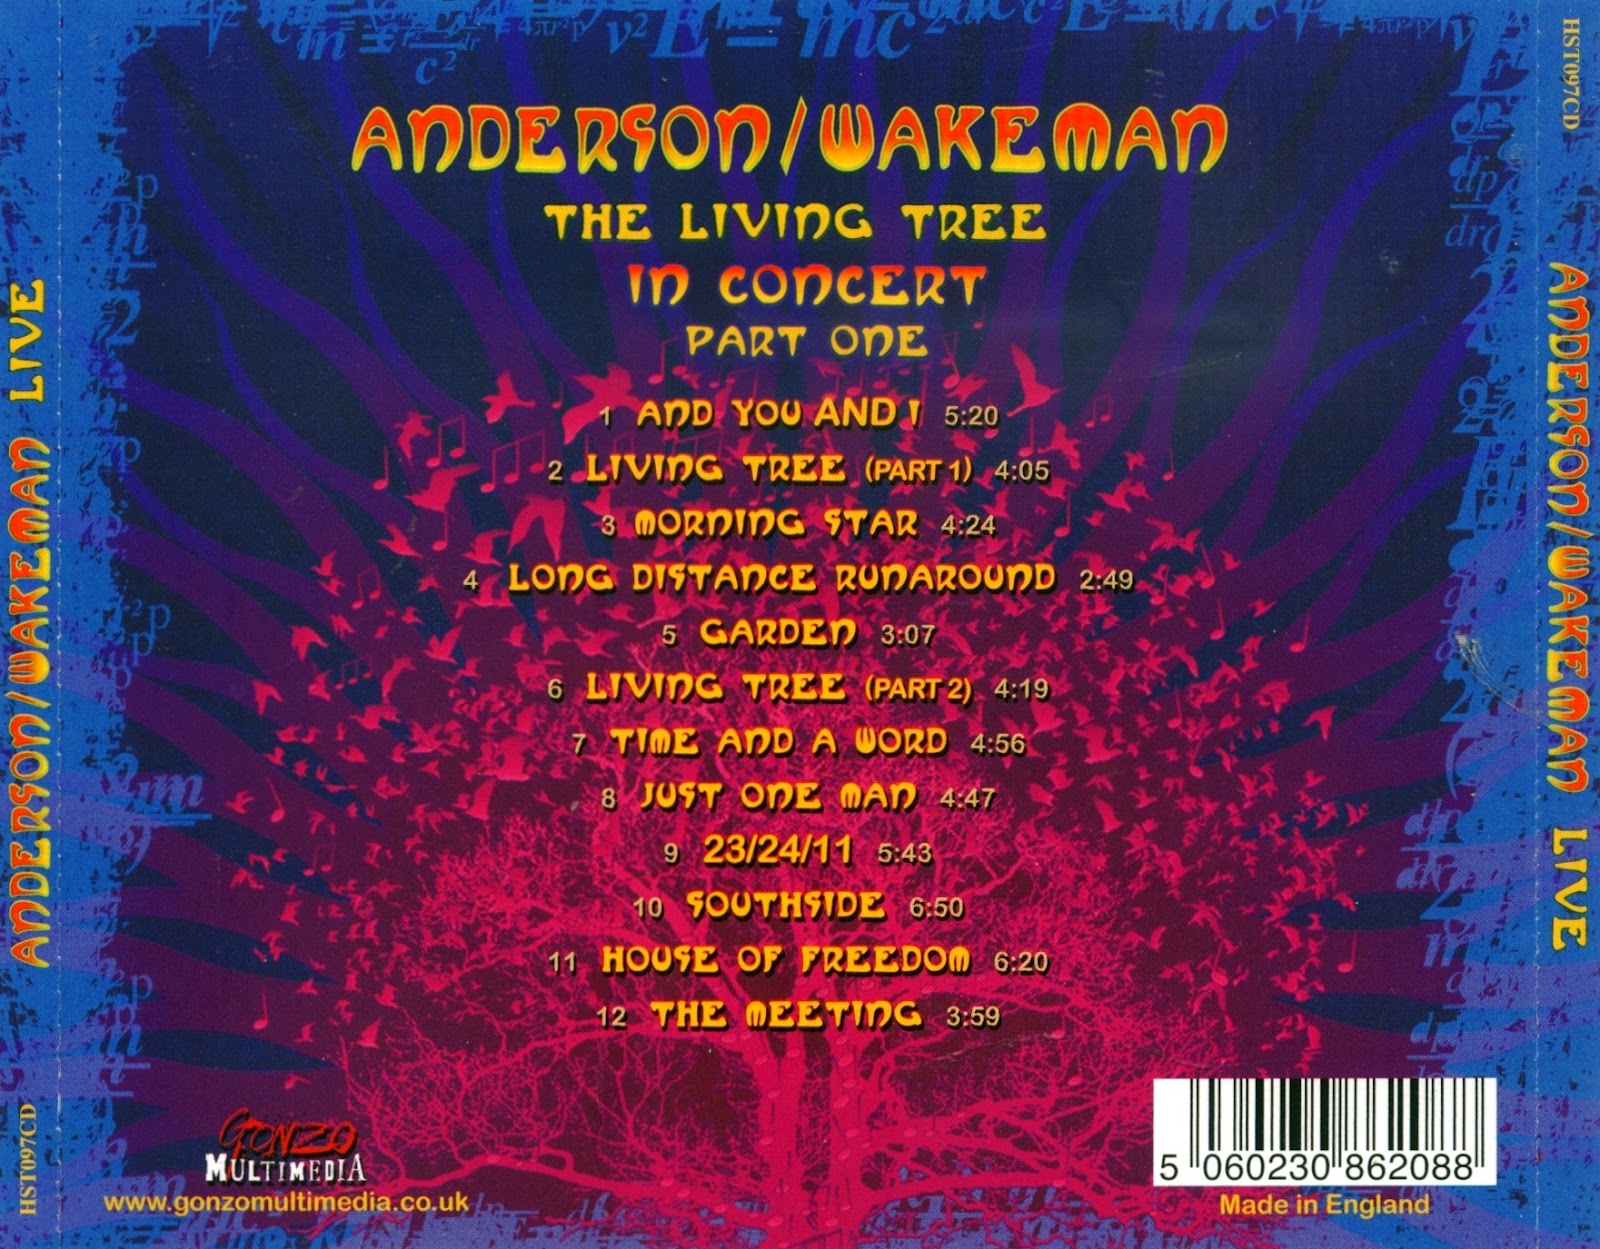 Nas Ondas Da Net Anderson And Wakeman The Living Tree In Concert Part One 2011